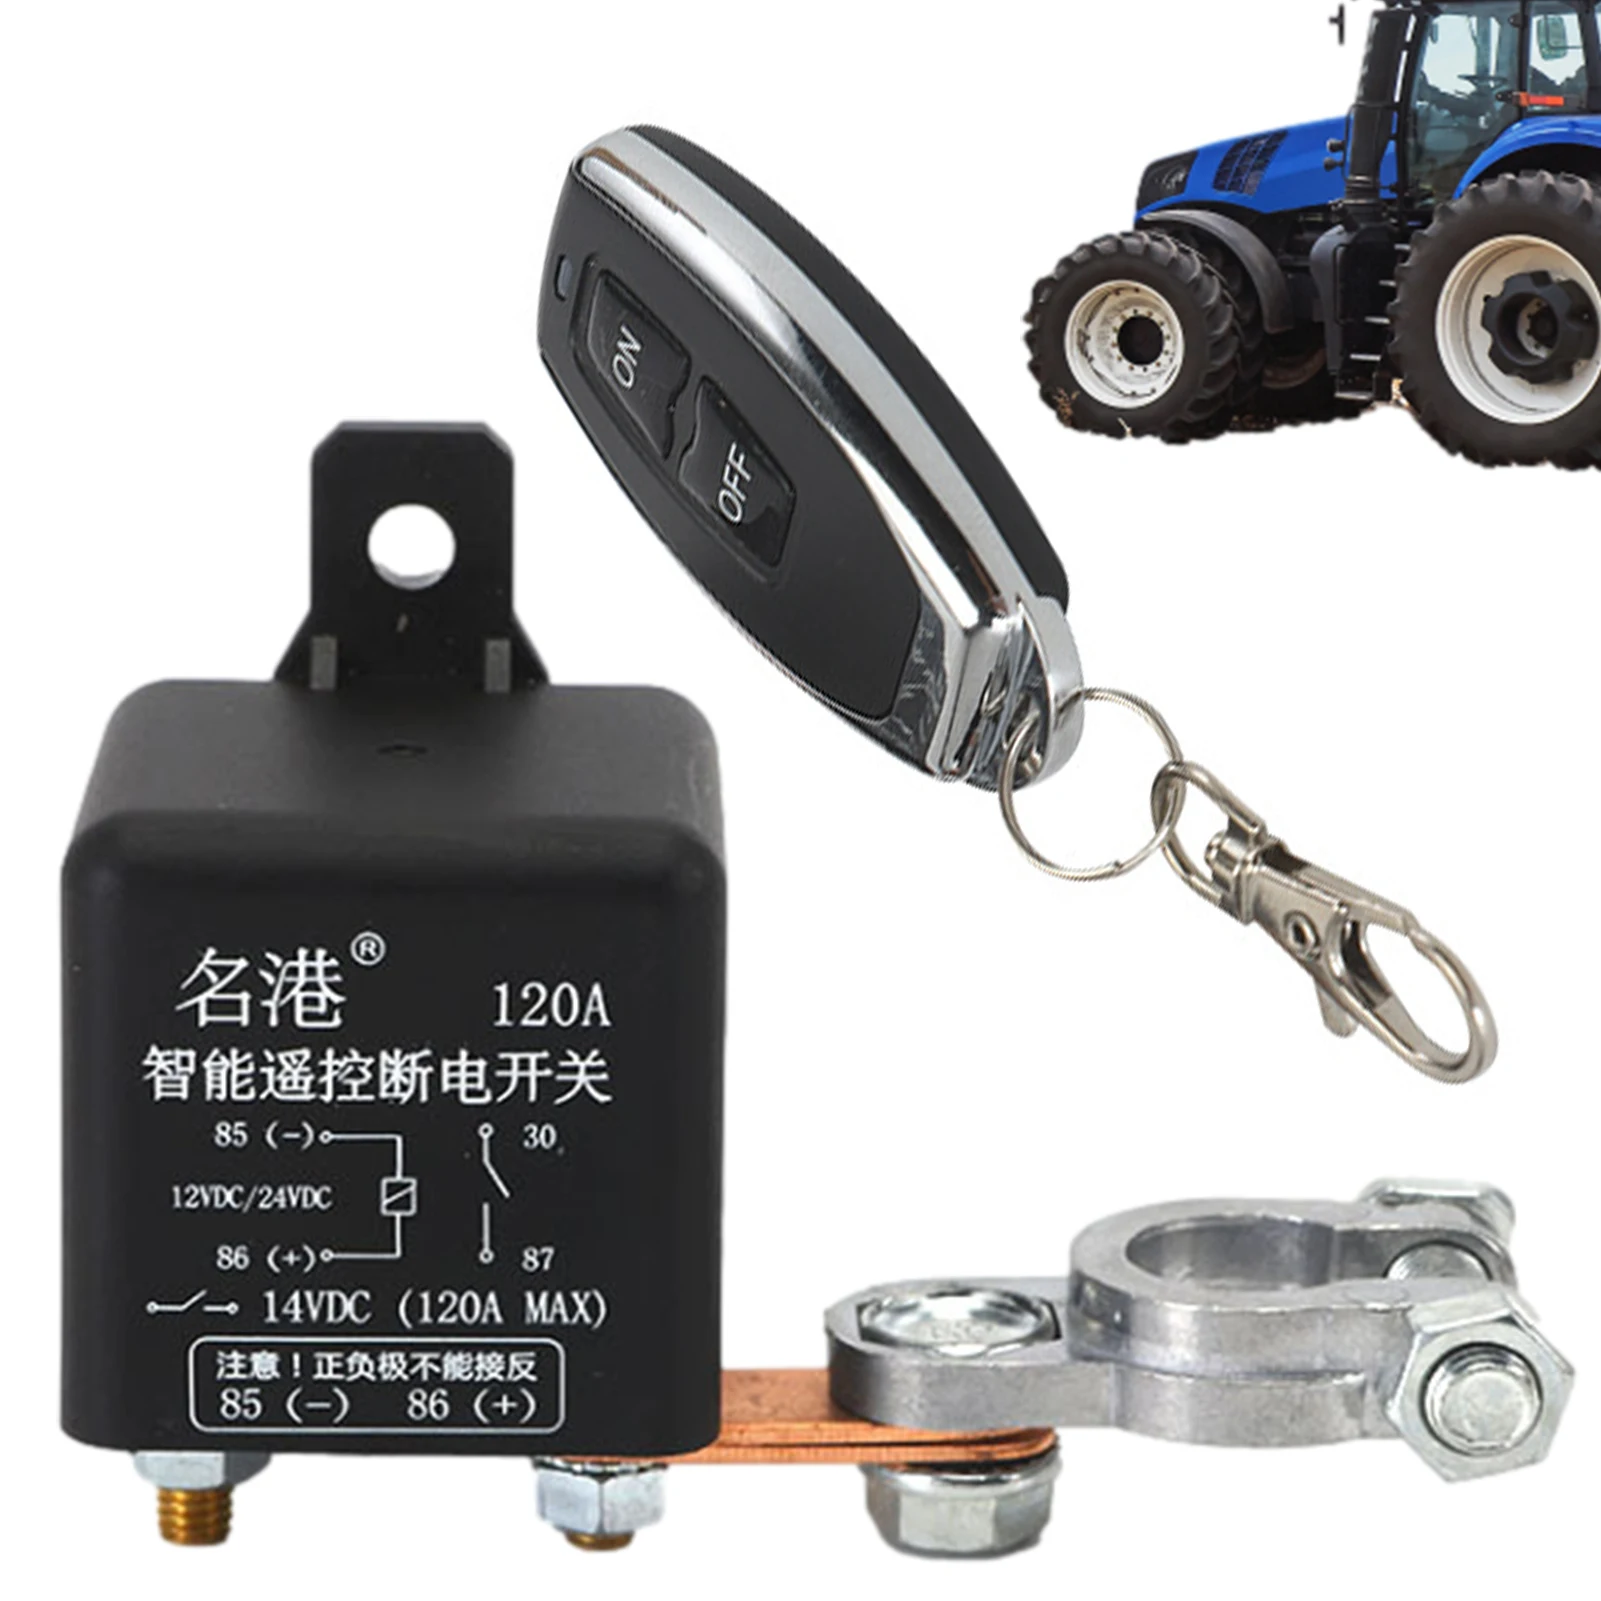 

Car Battery Switch Relay 24V / 12V 1.8W 200A Wireless Remote Control Battery Isolator Car Total Power Protection Universal